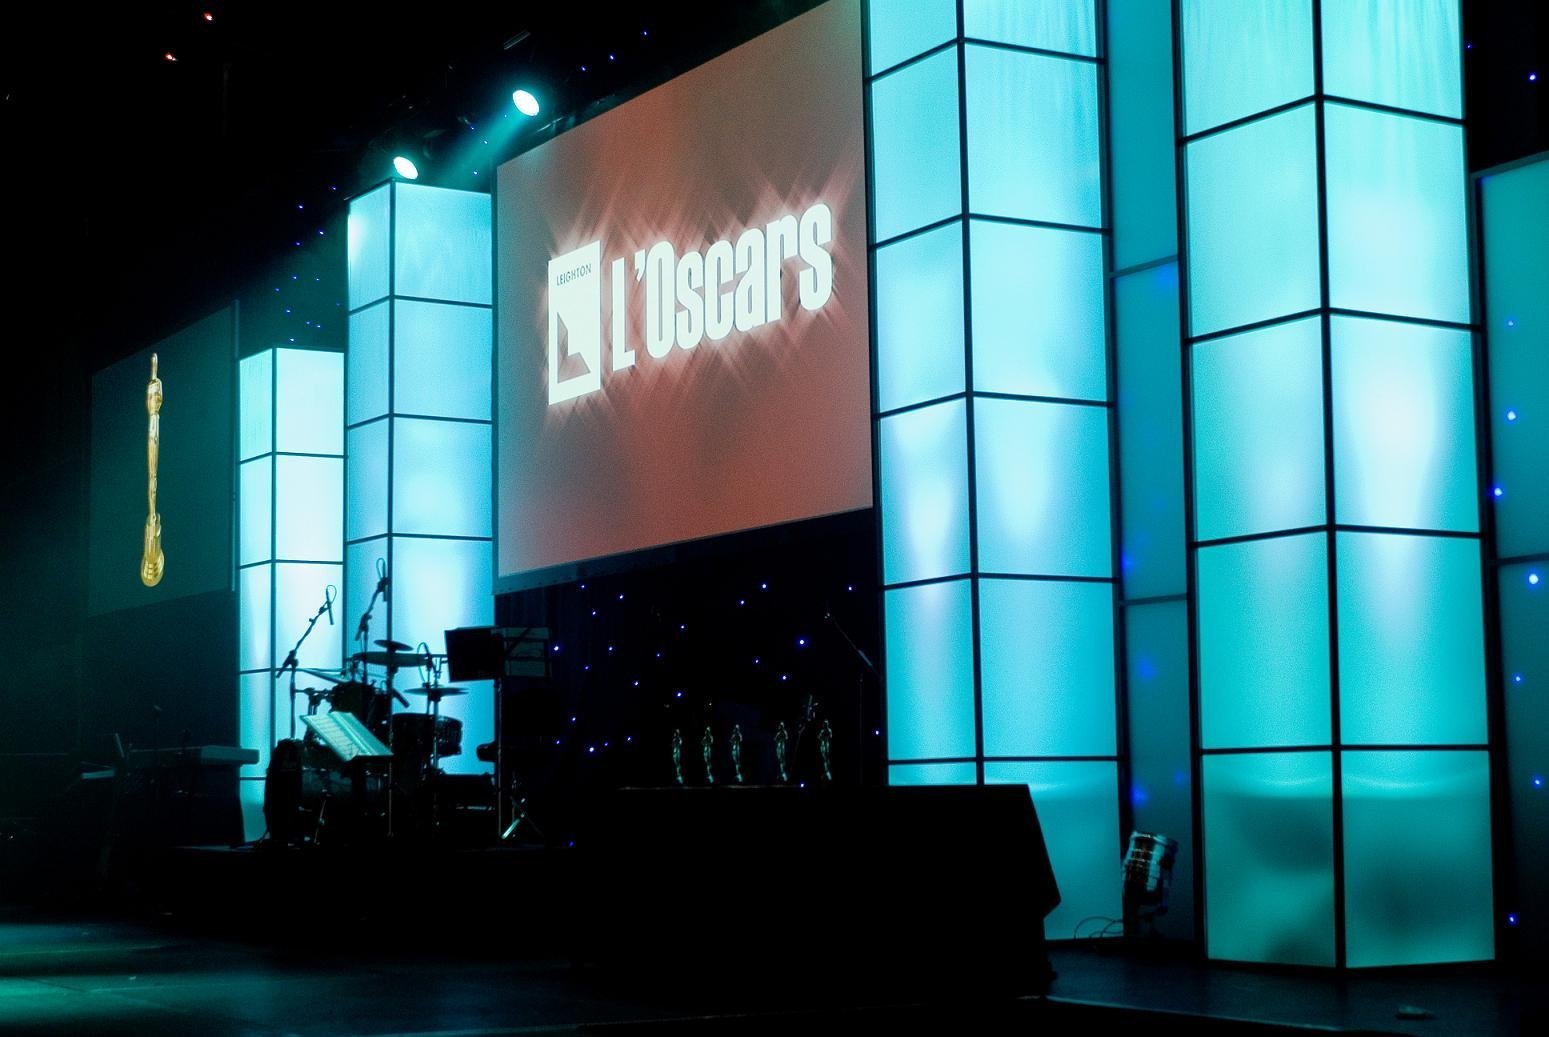 Providing Stage Set Design, Innovation LED Products and Conference Audio Visual.